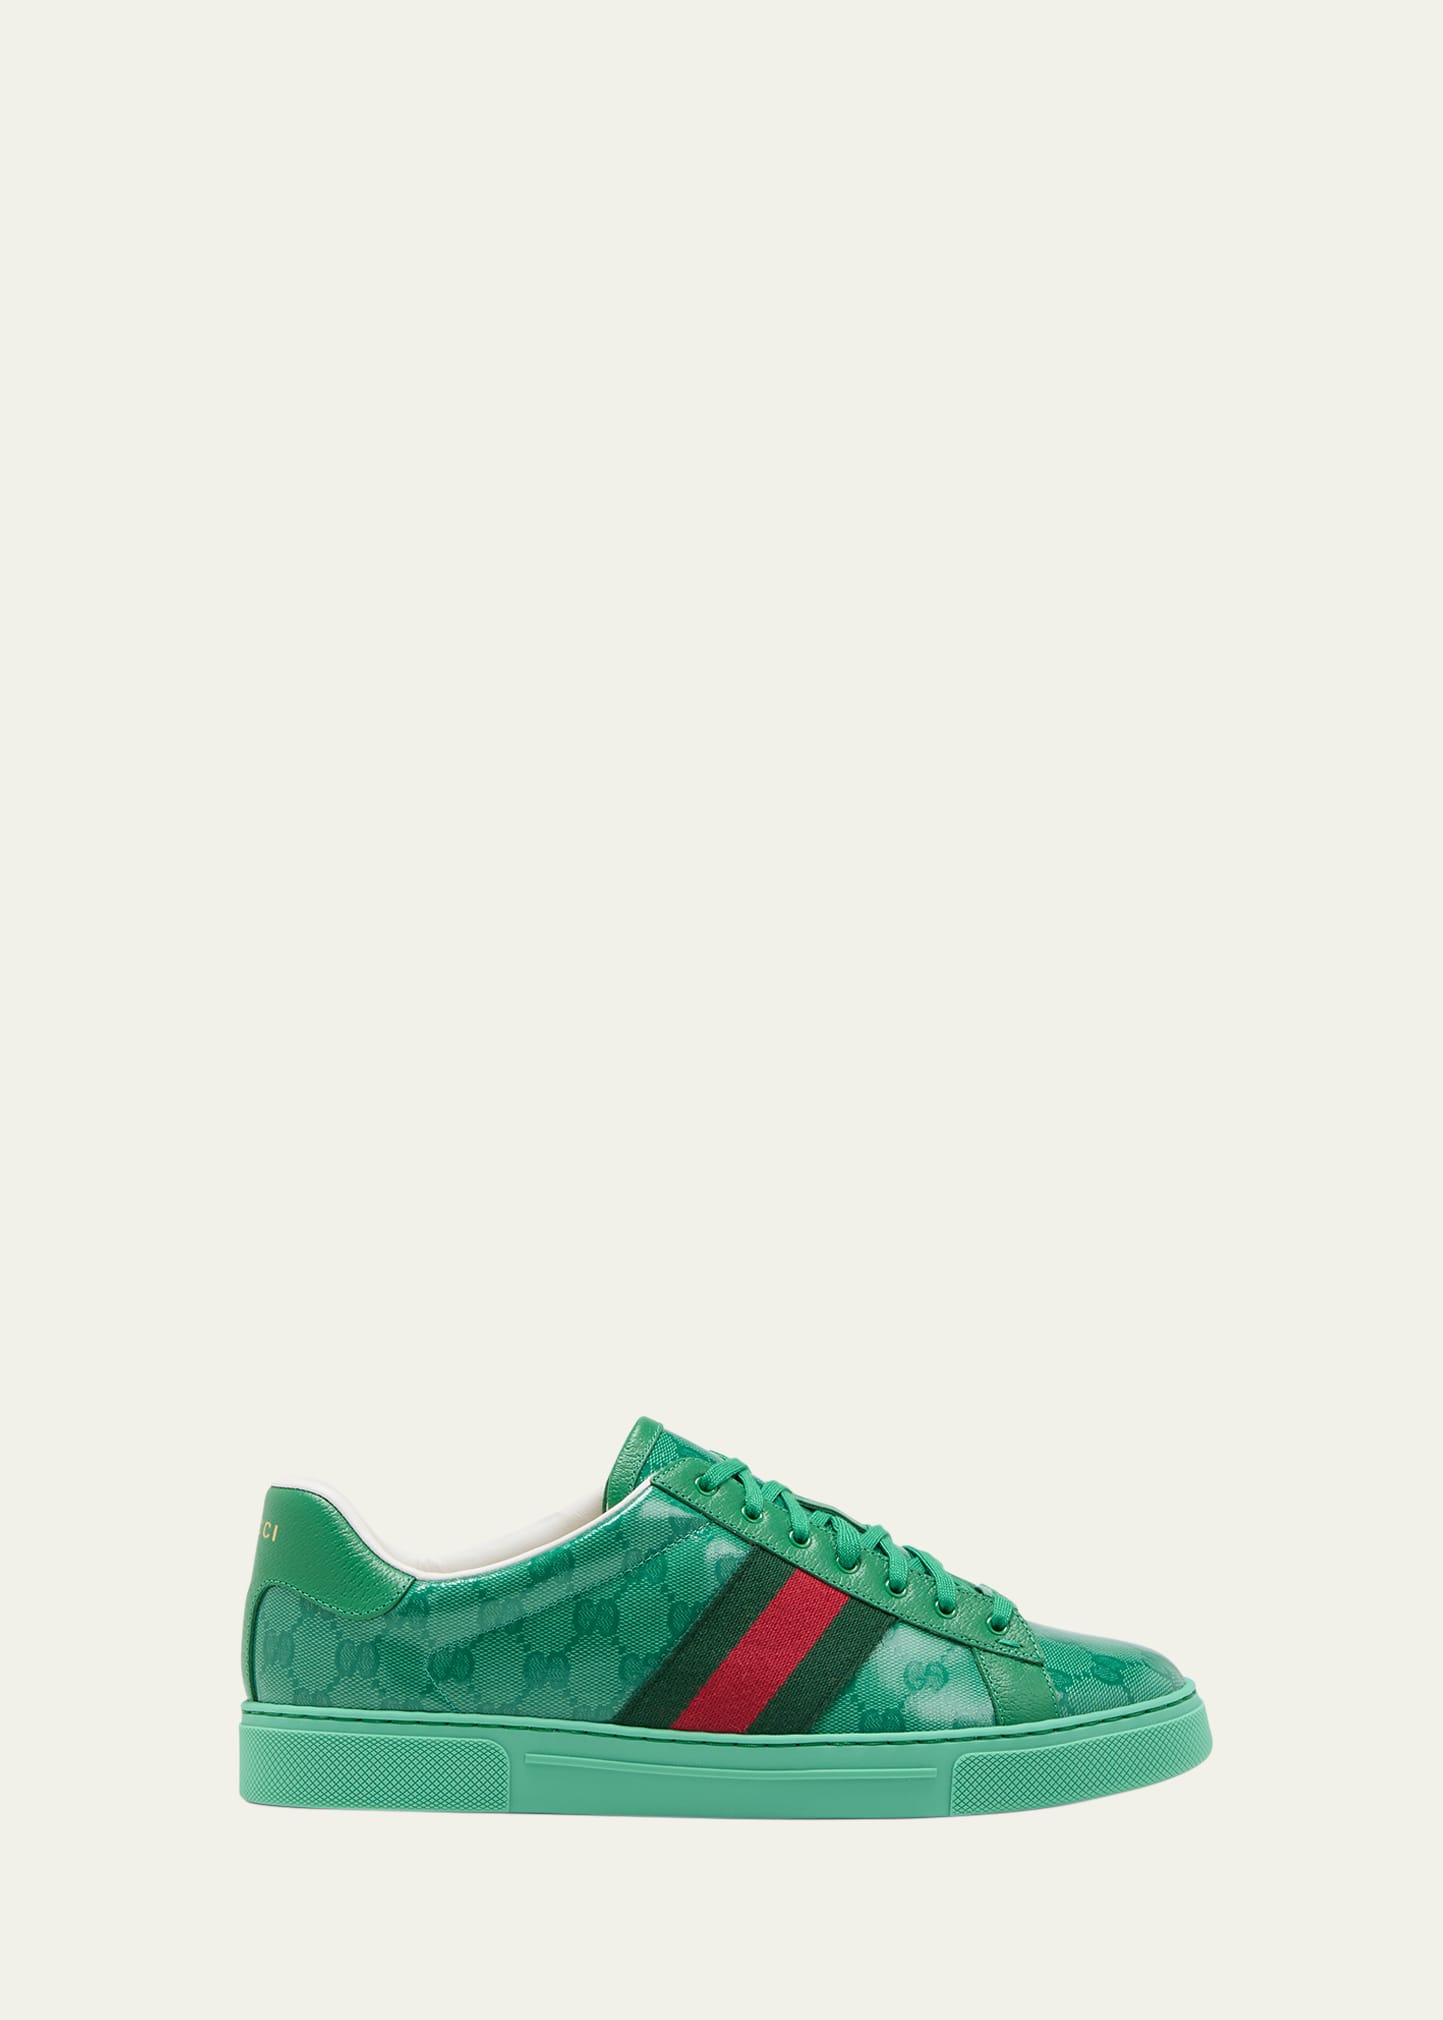 Shop Gucci Men's Ace Gg Crystal Canvas Sneakers In Black